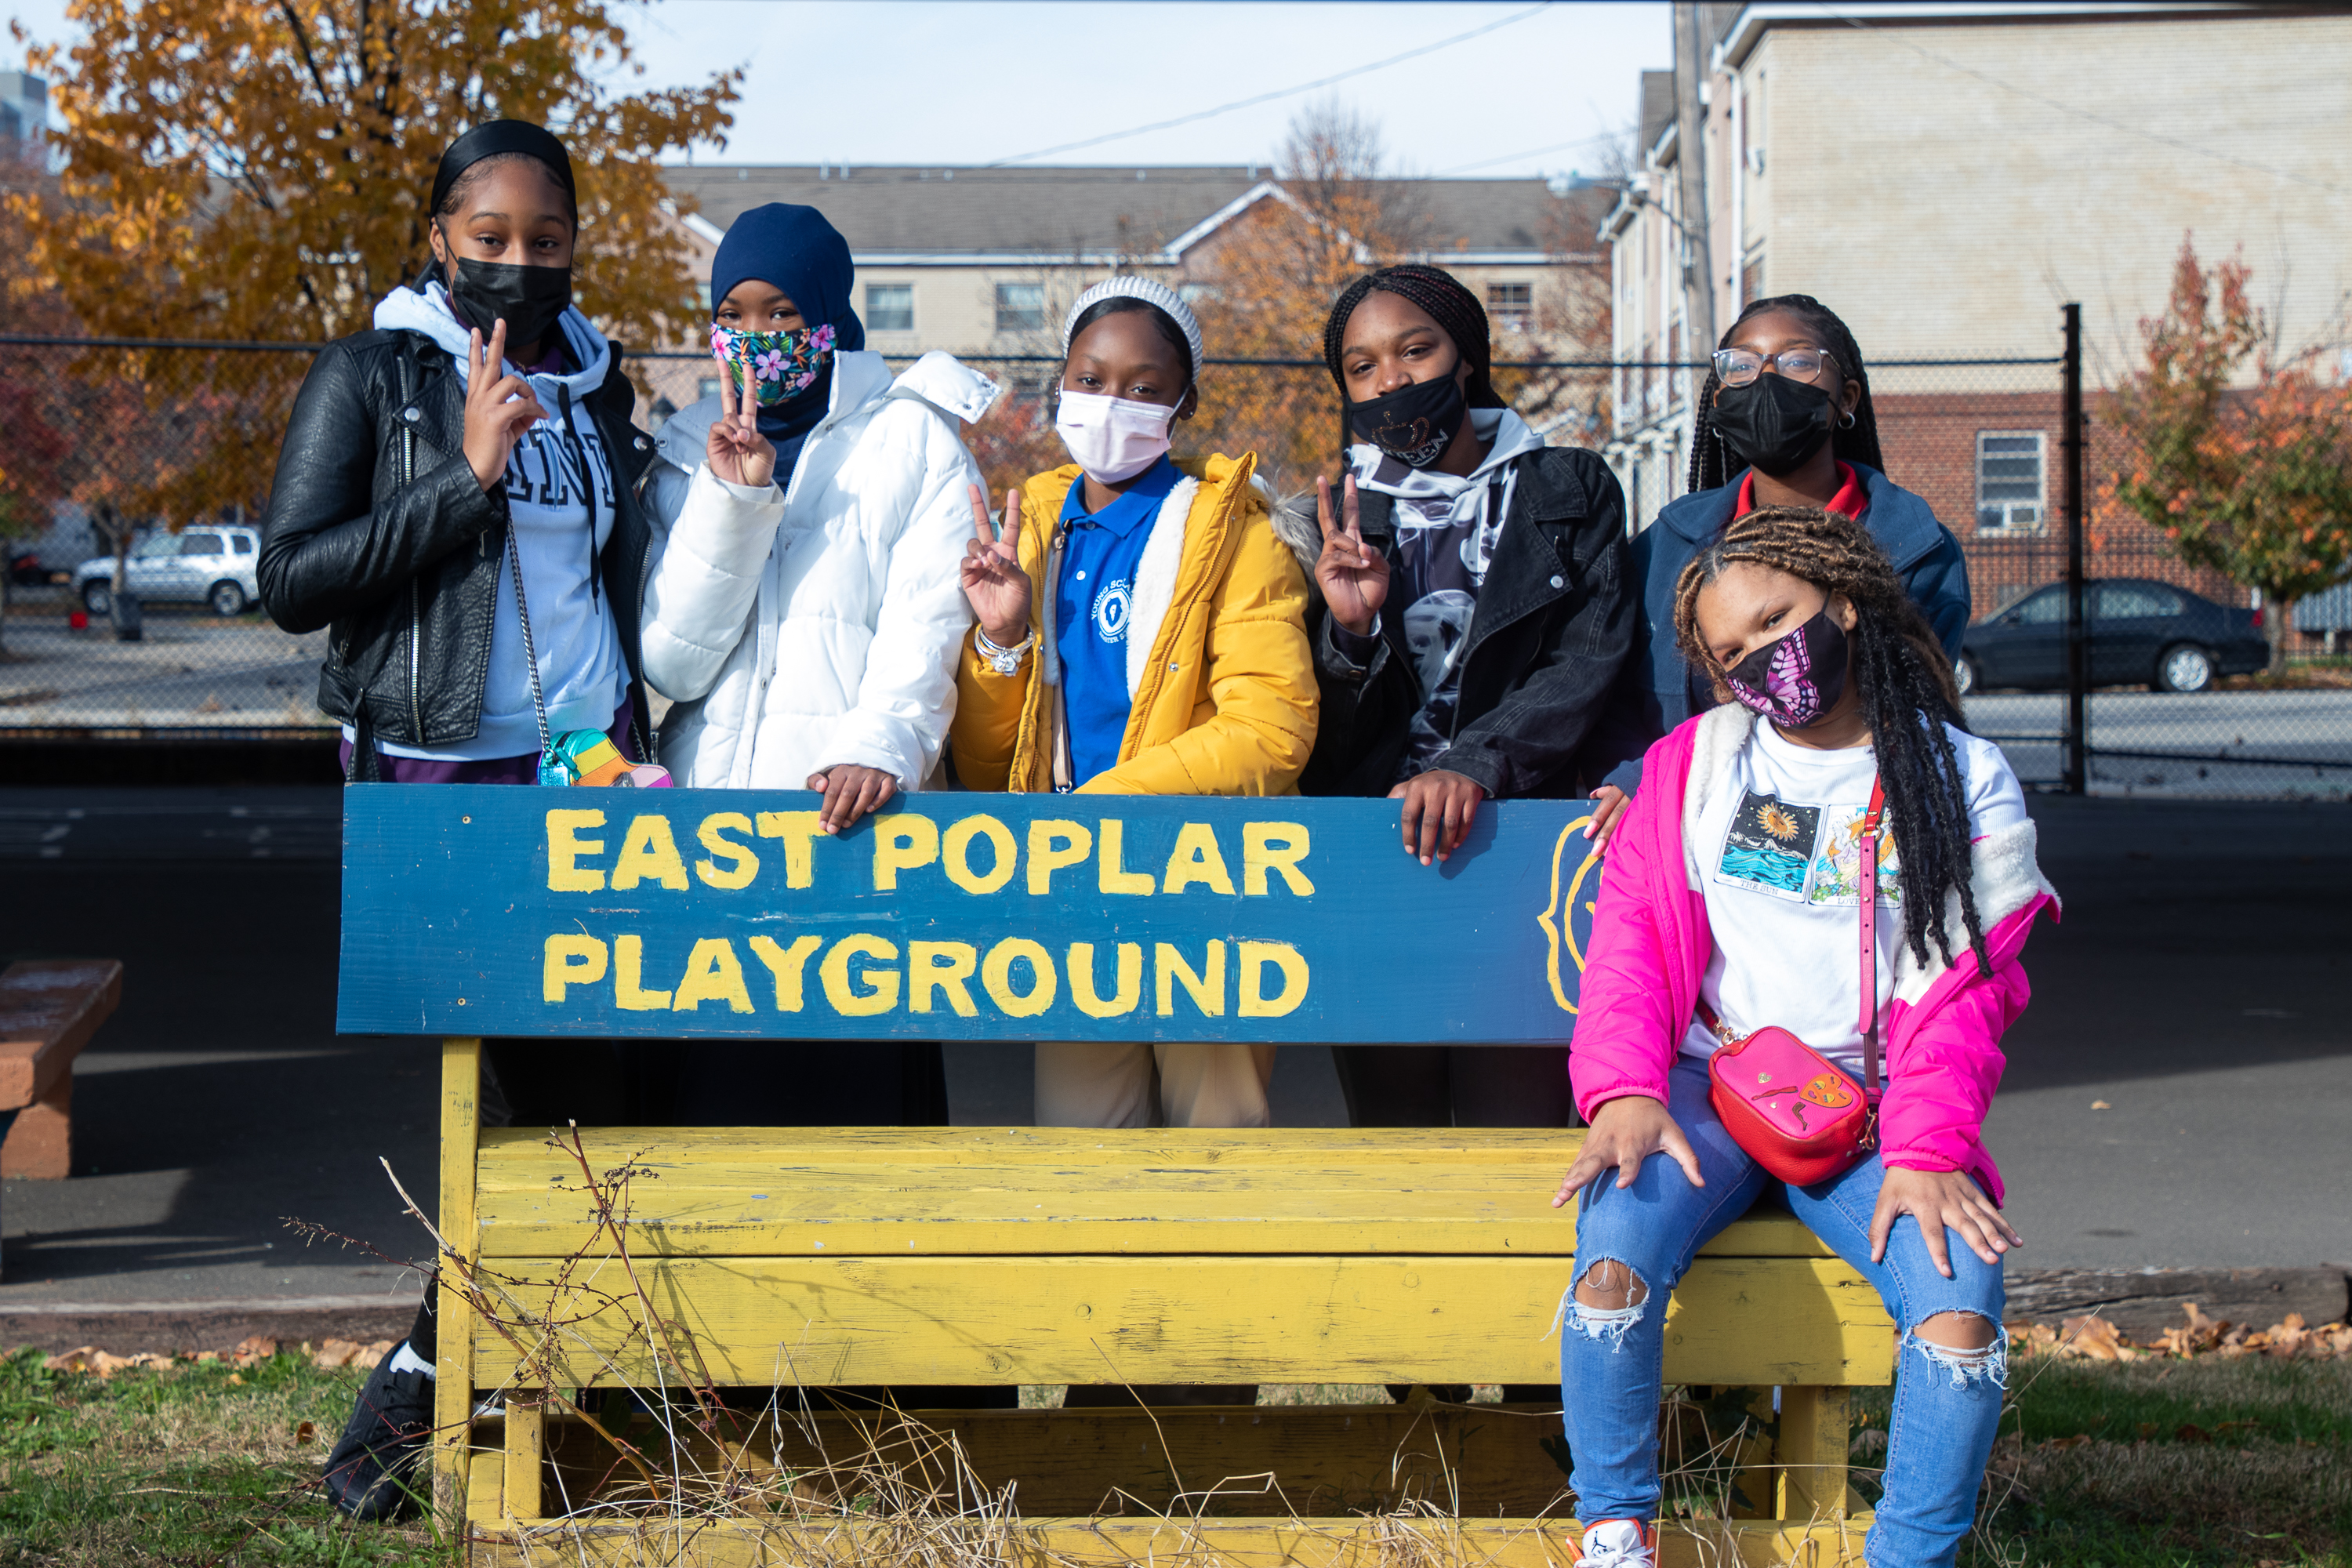 A girl sitting on a blue and yellow bench that says East Poplar Playground and five girls standing behind the bench.